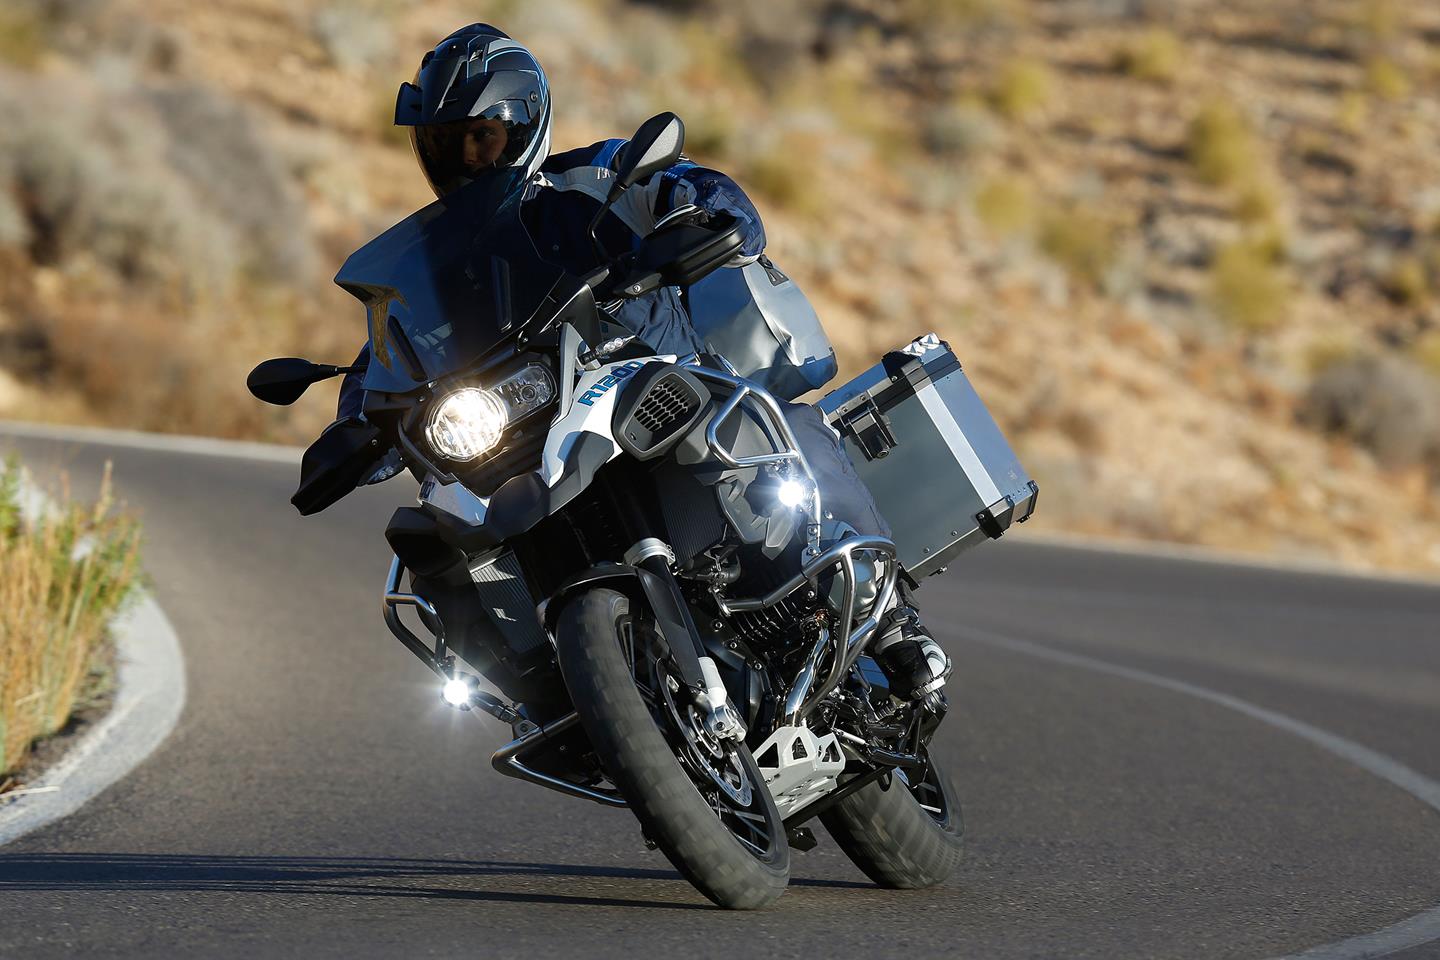 2014 BMW R1200GS Adventure review | Take your tour off-road